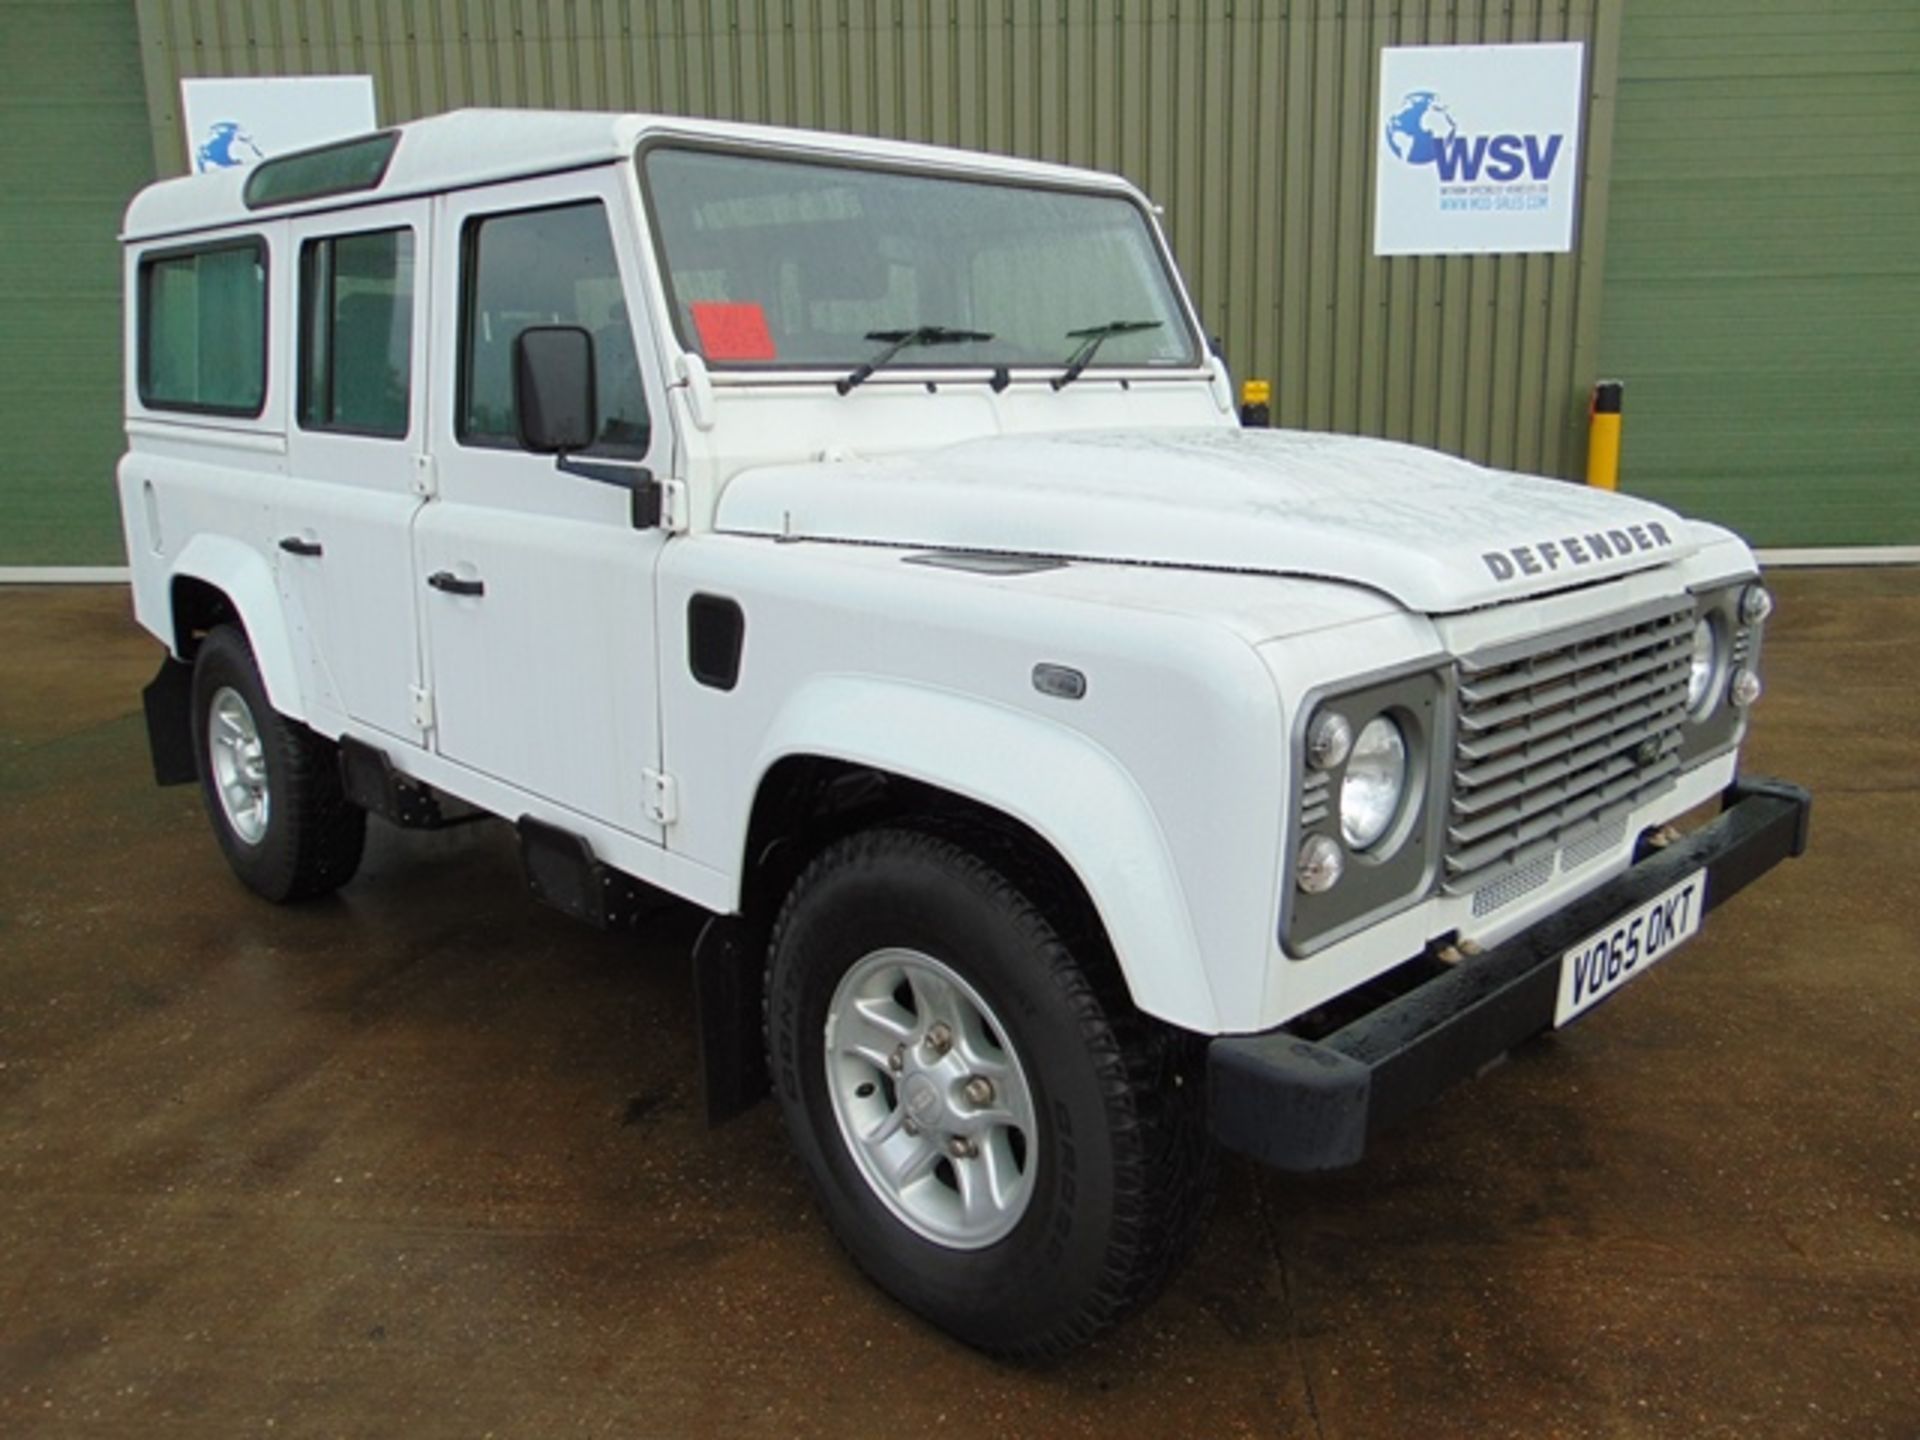 2015 Land Rover Defender 110 5 Door County Station Wagon ONLY 8,915 miles!!! - Image 2 of 24